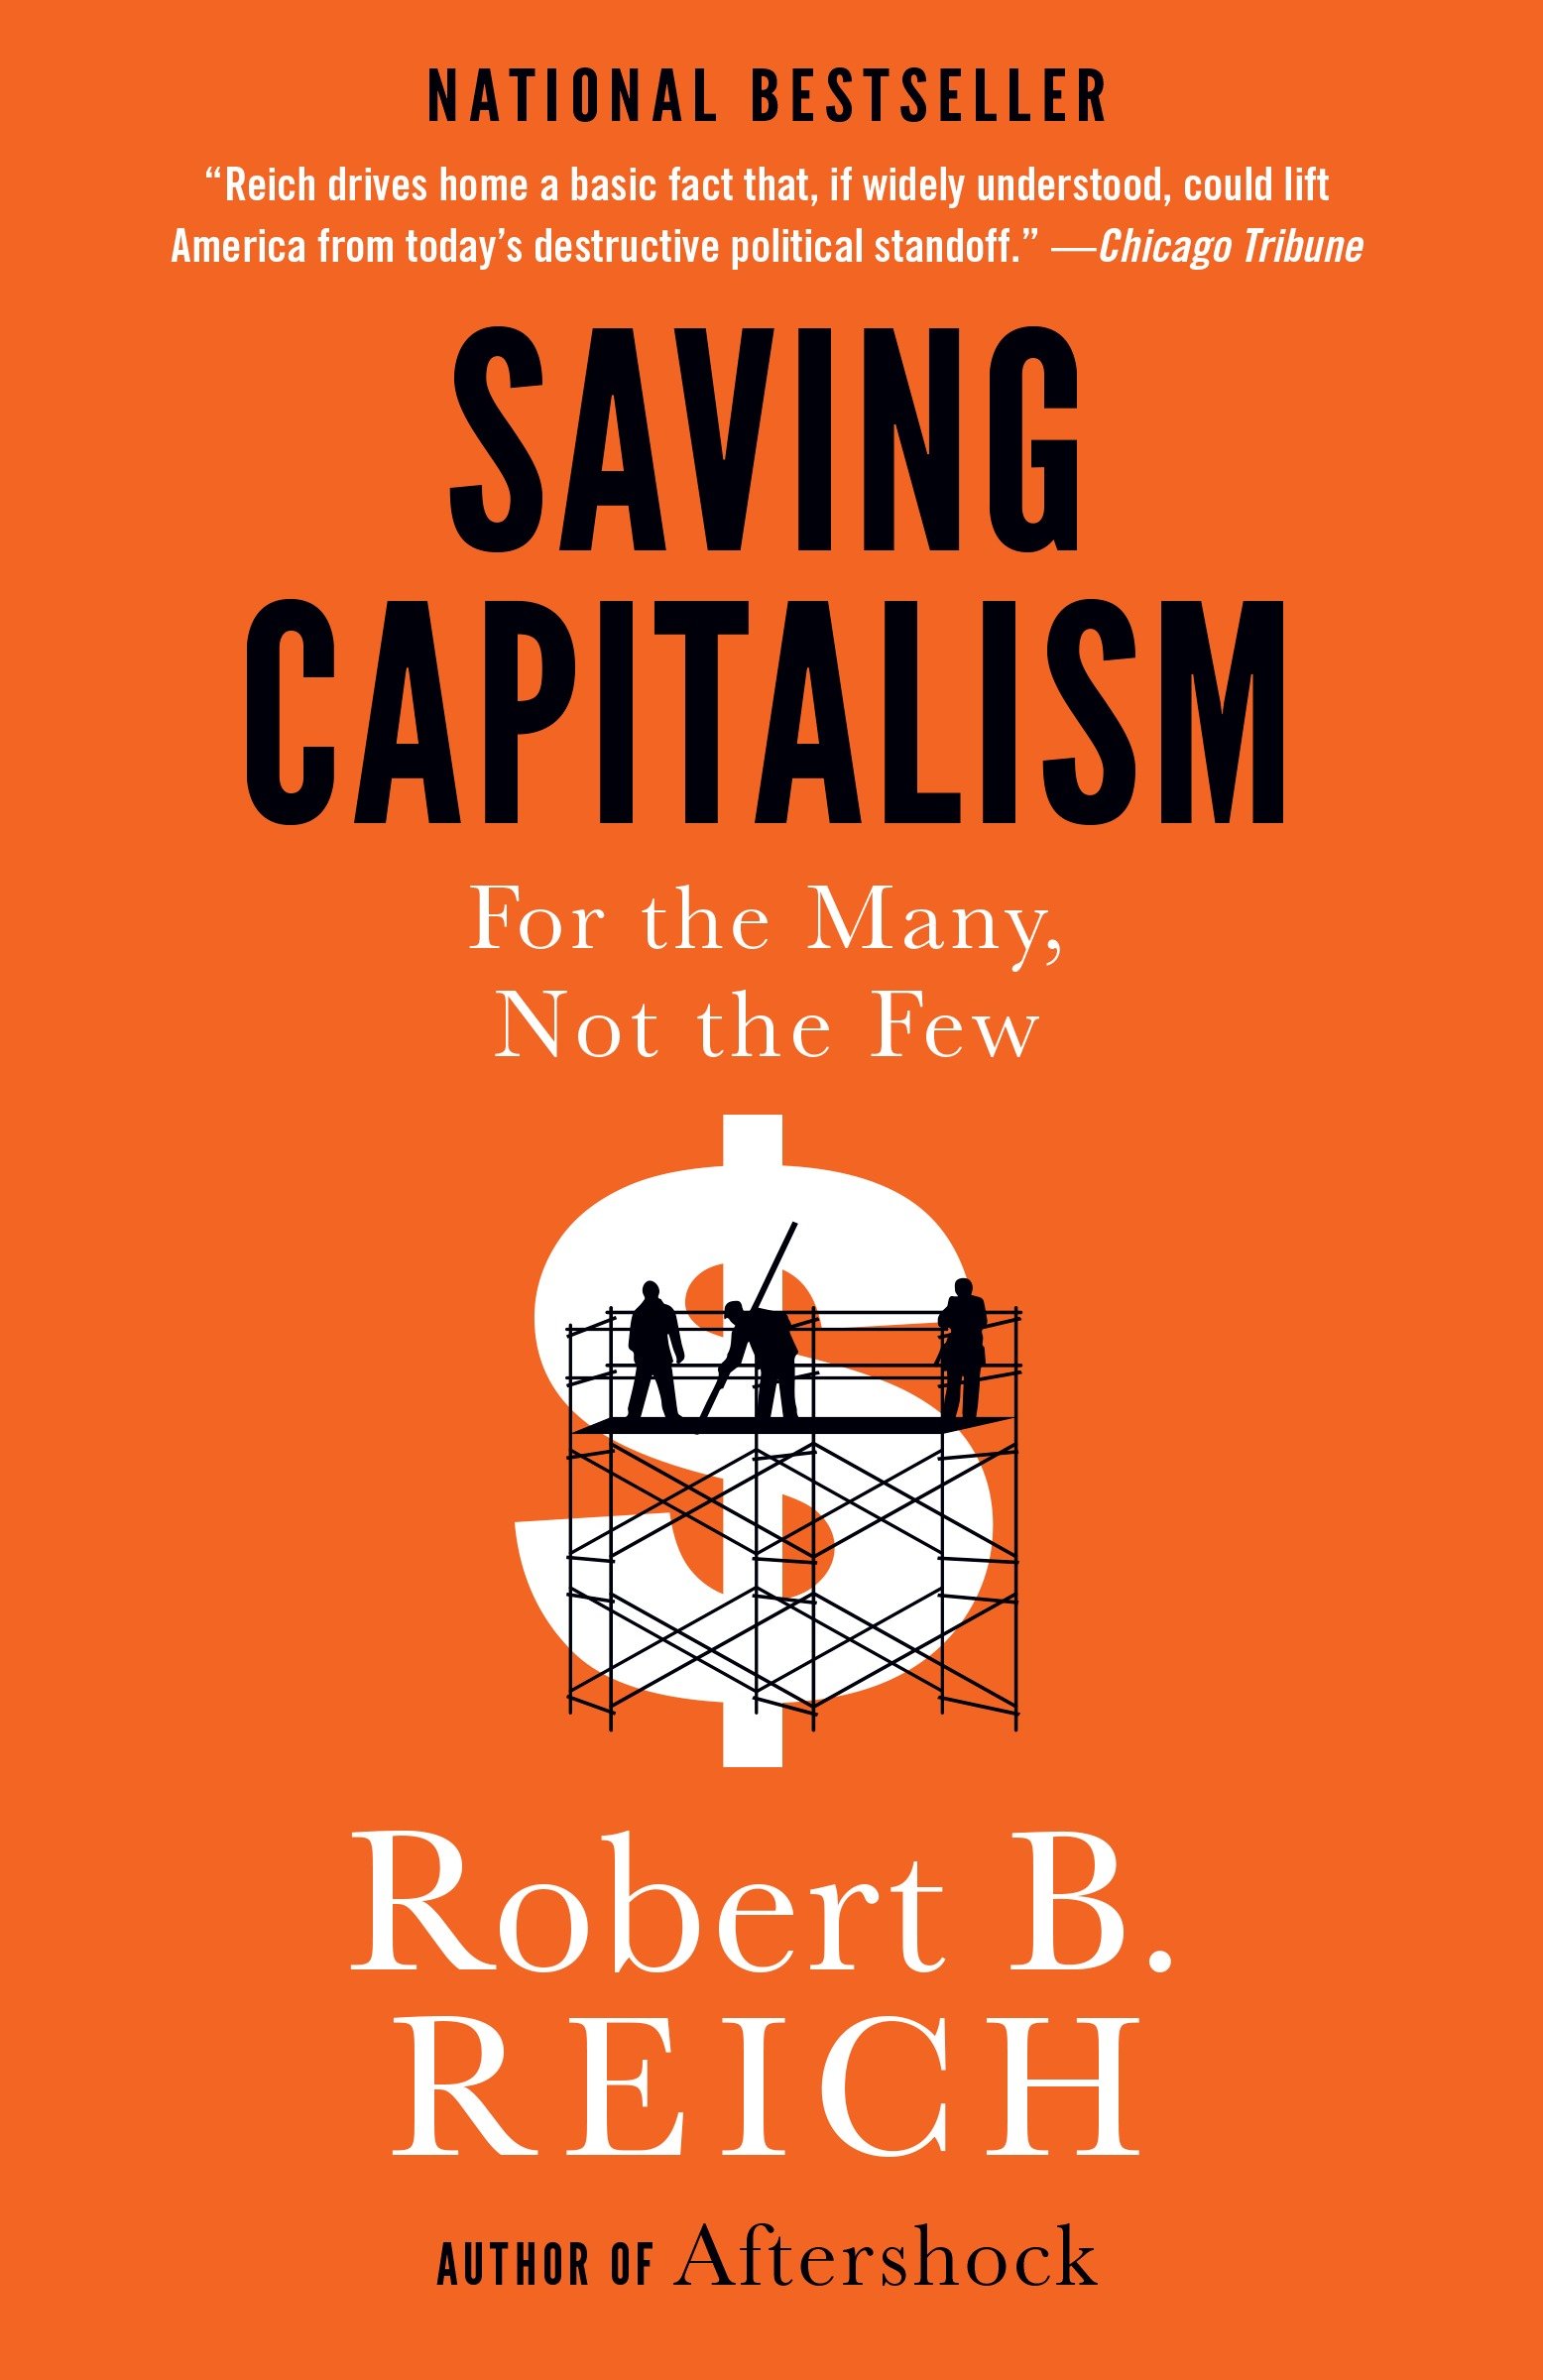 Saving capitalism for the many, not the few cover image